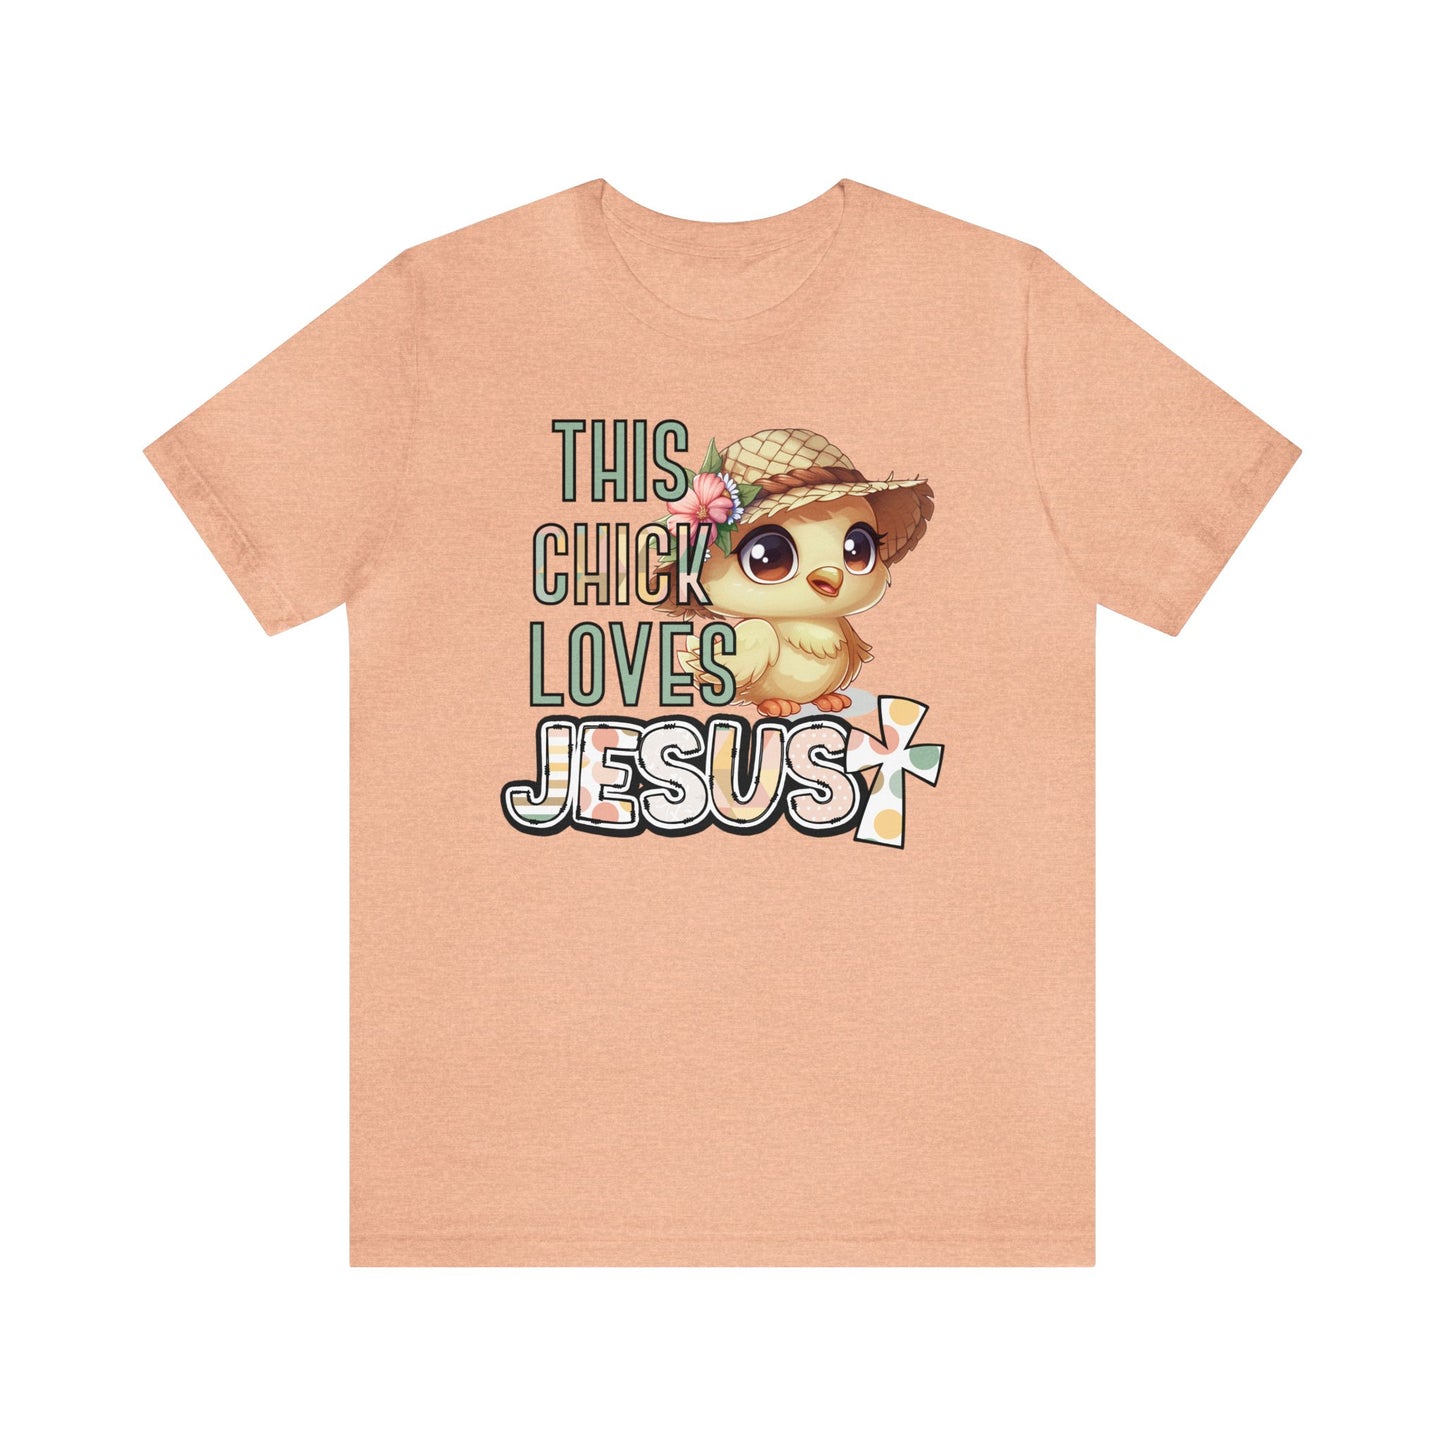 This Chick Loves Jesus T-shirt